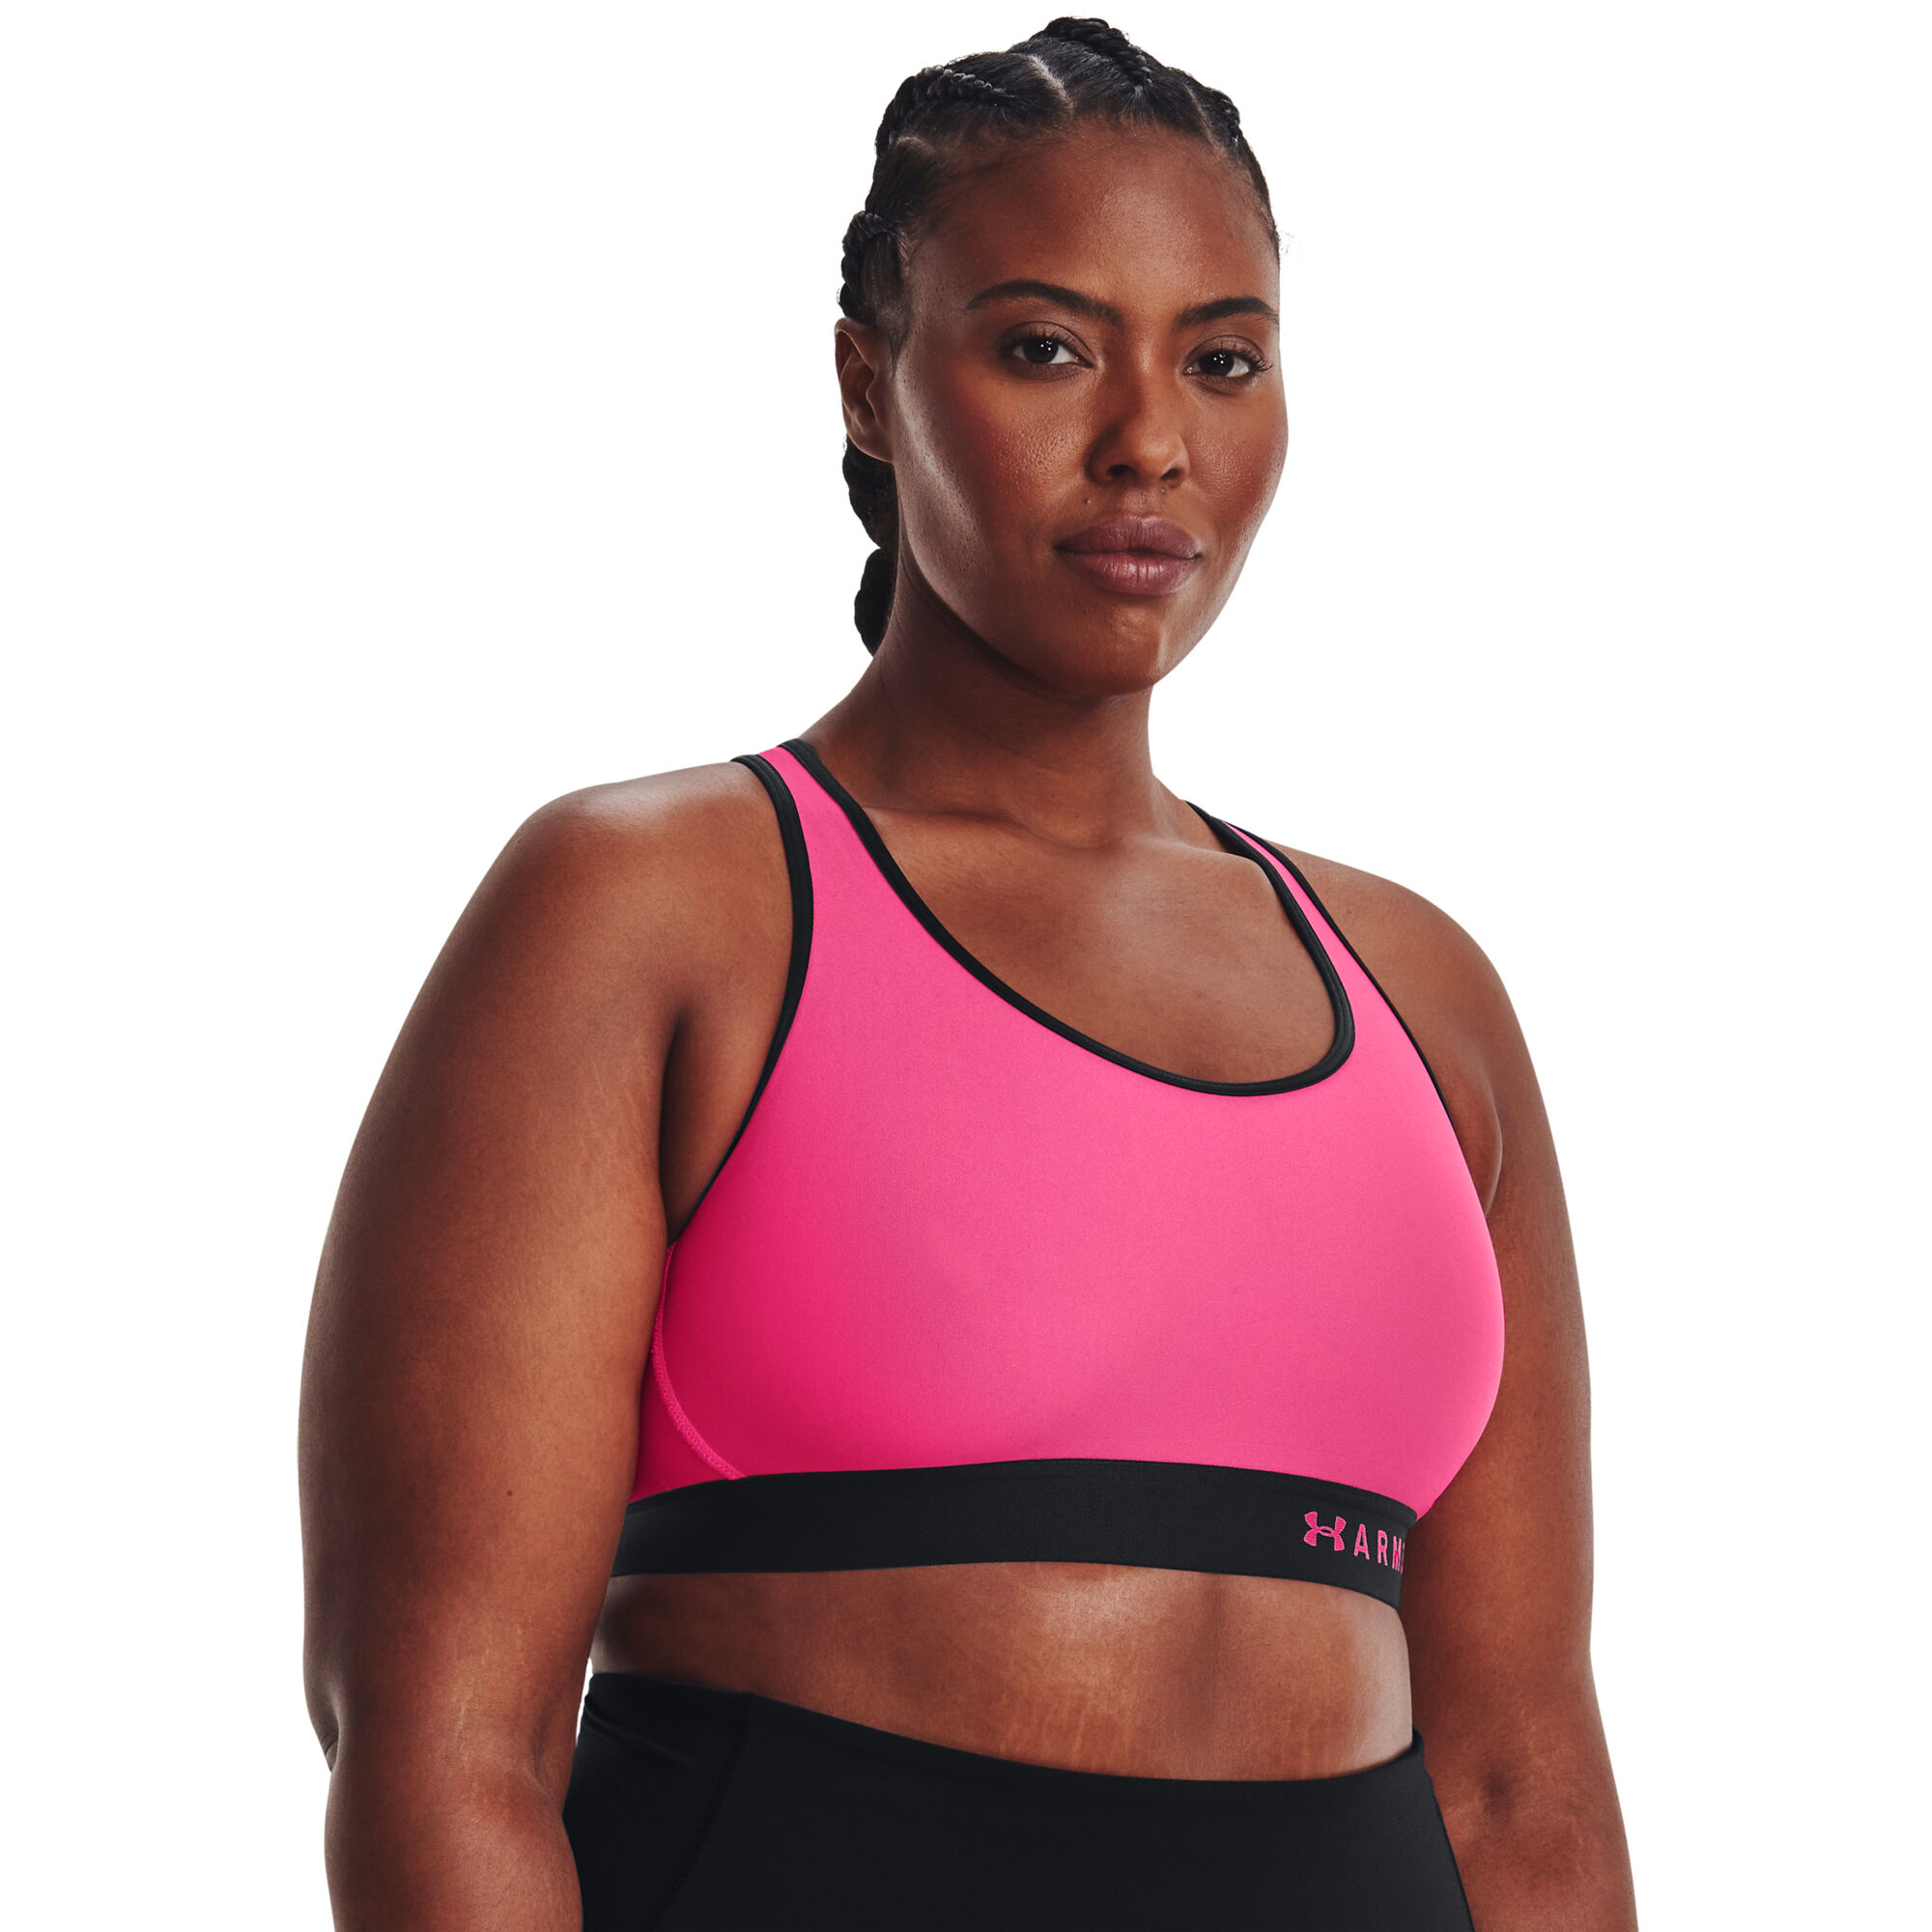 Under Armour Armour Mid Keyhole Women's Bra, Black,Size MD price